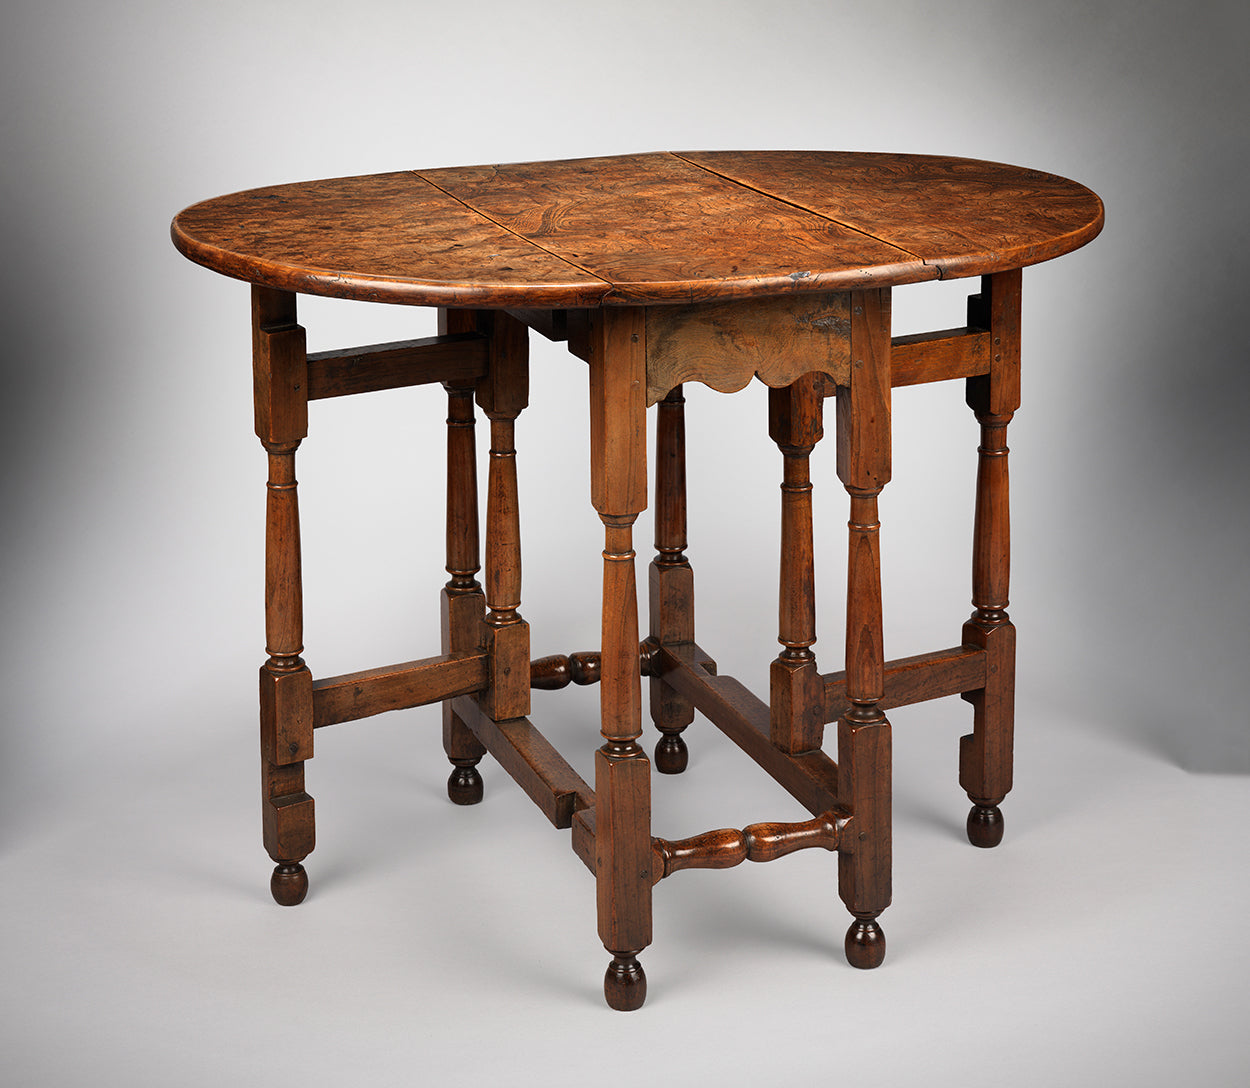 Remarkable Diminutive Queen Anne Oval Drop Leaf Table